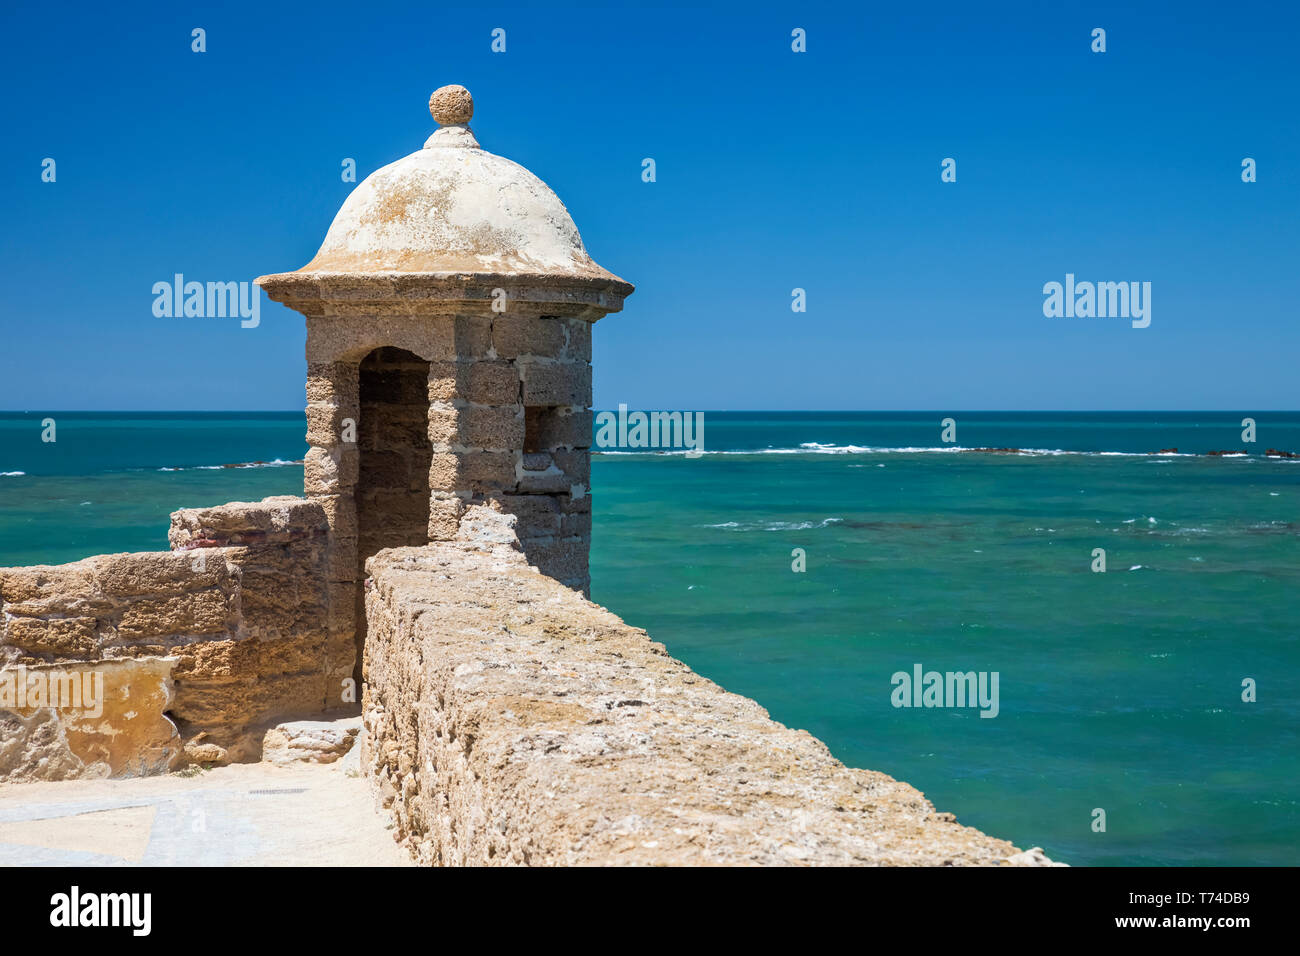 Stone wall and tower looking out to the Mediterranean Sea; Cadiz, Andalusia, Spain Stock Photo